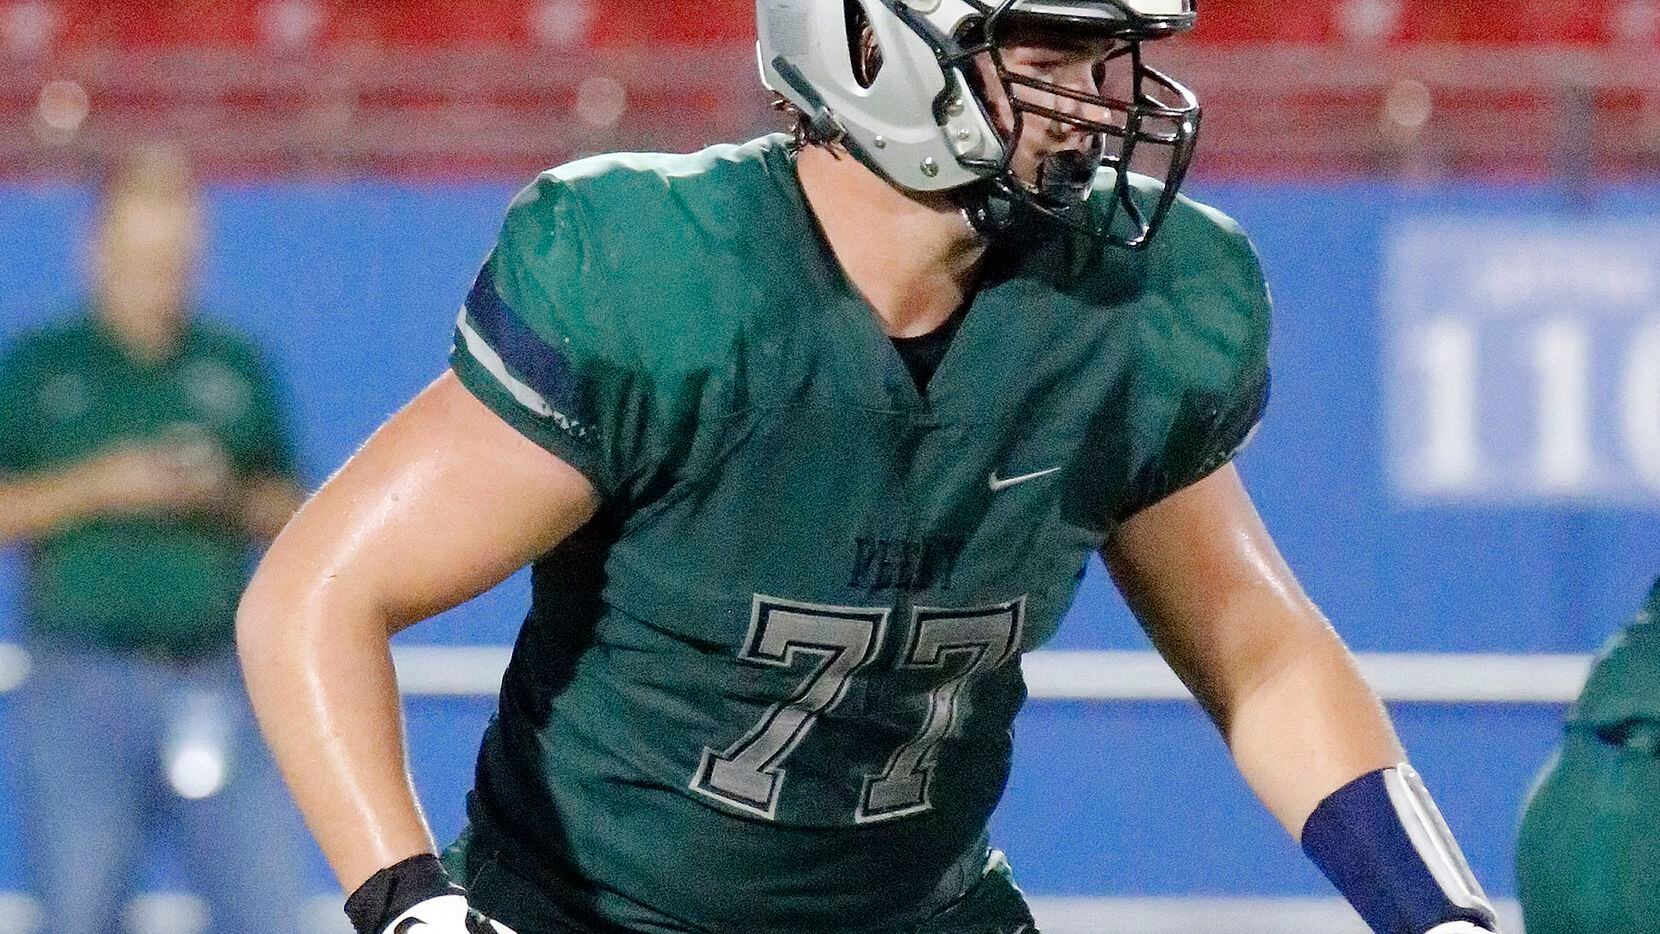 FILE - Reedy High School offensive lineman Nate Anderson looks for a block during the second half as Reedy High School hosted Plano West High School in a non-district football game at Toyota Stadium in Frisco on Thursday, August 28, 2019. (Stewart F. House/Special Contributor)